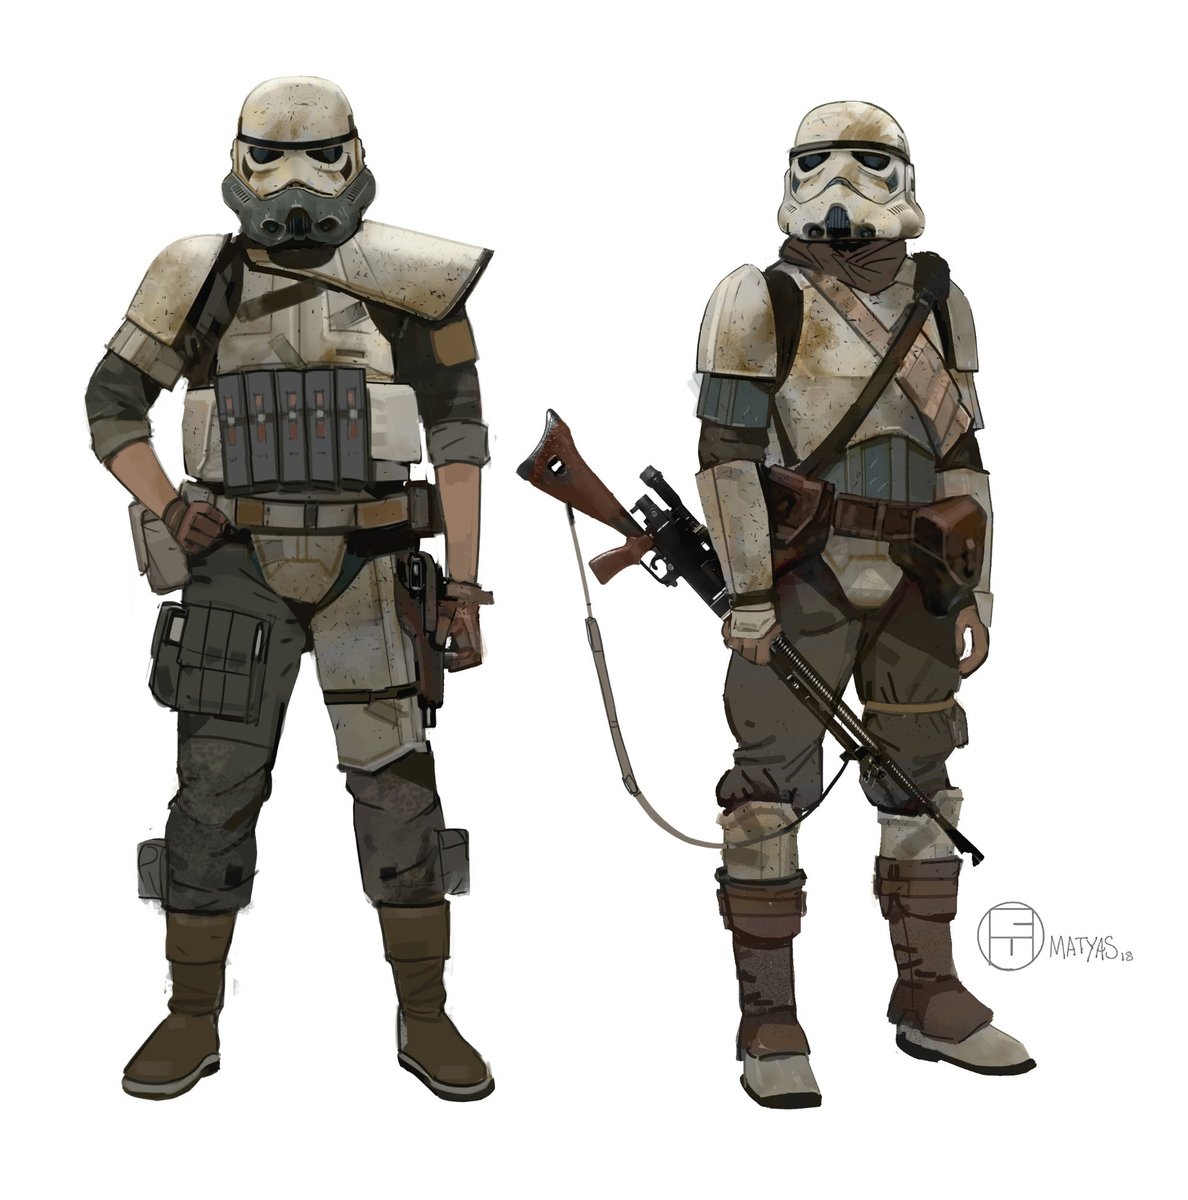 Imperial Remnant concepts for the Mandalorian, a much more bandit-guerilla aesthetic with field repairs and environmental personalizations